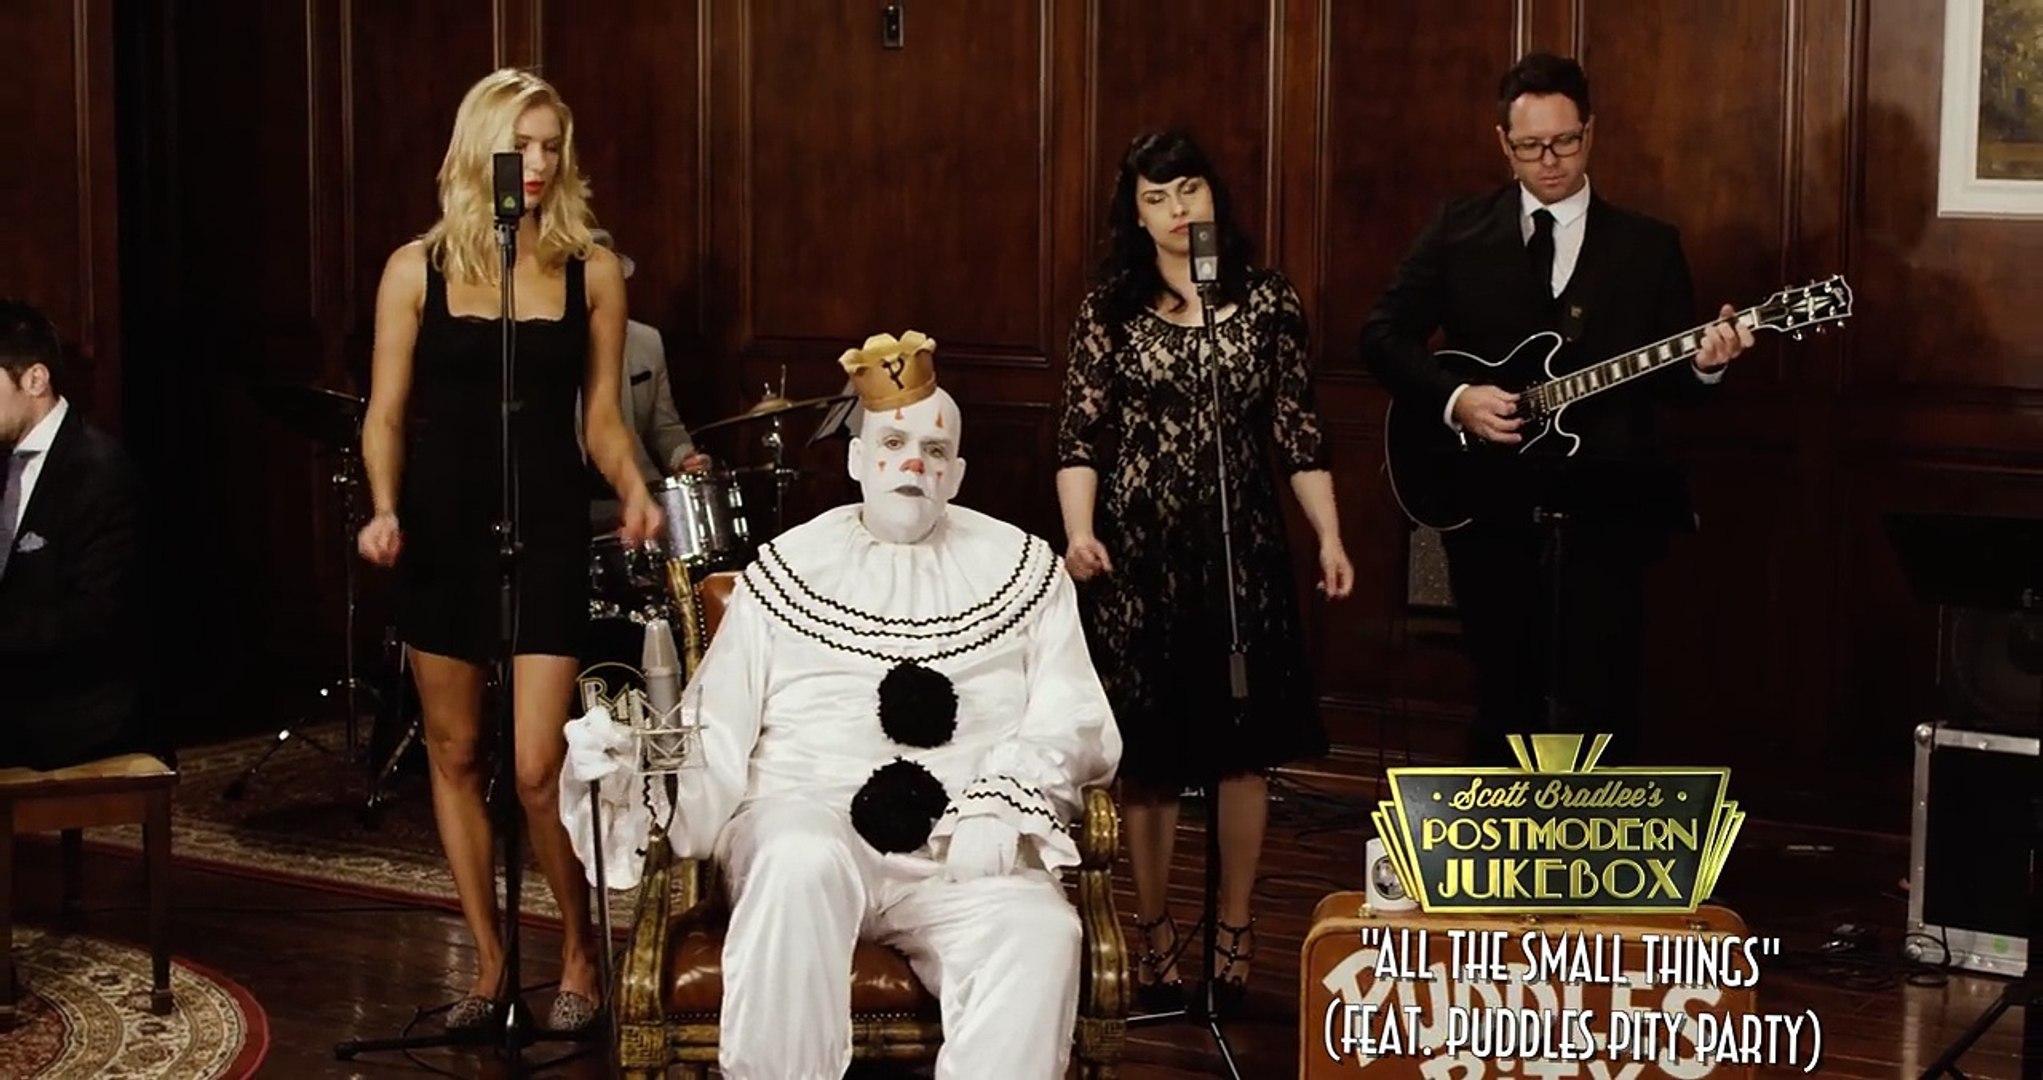 All the small things postmodern jukebox